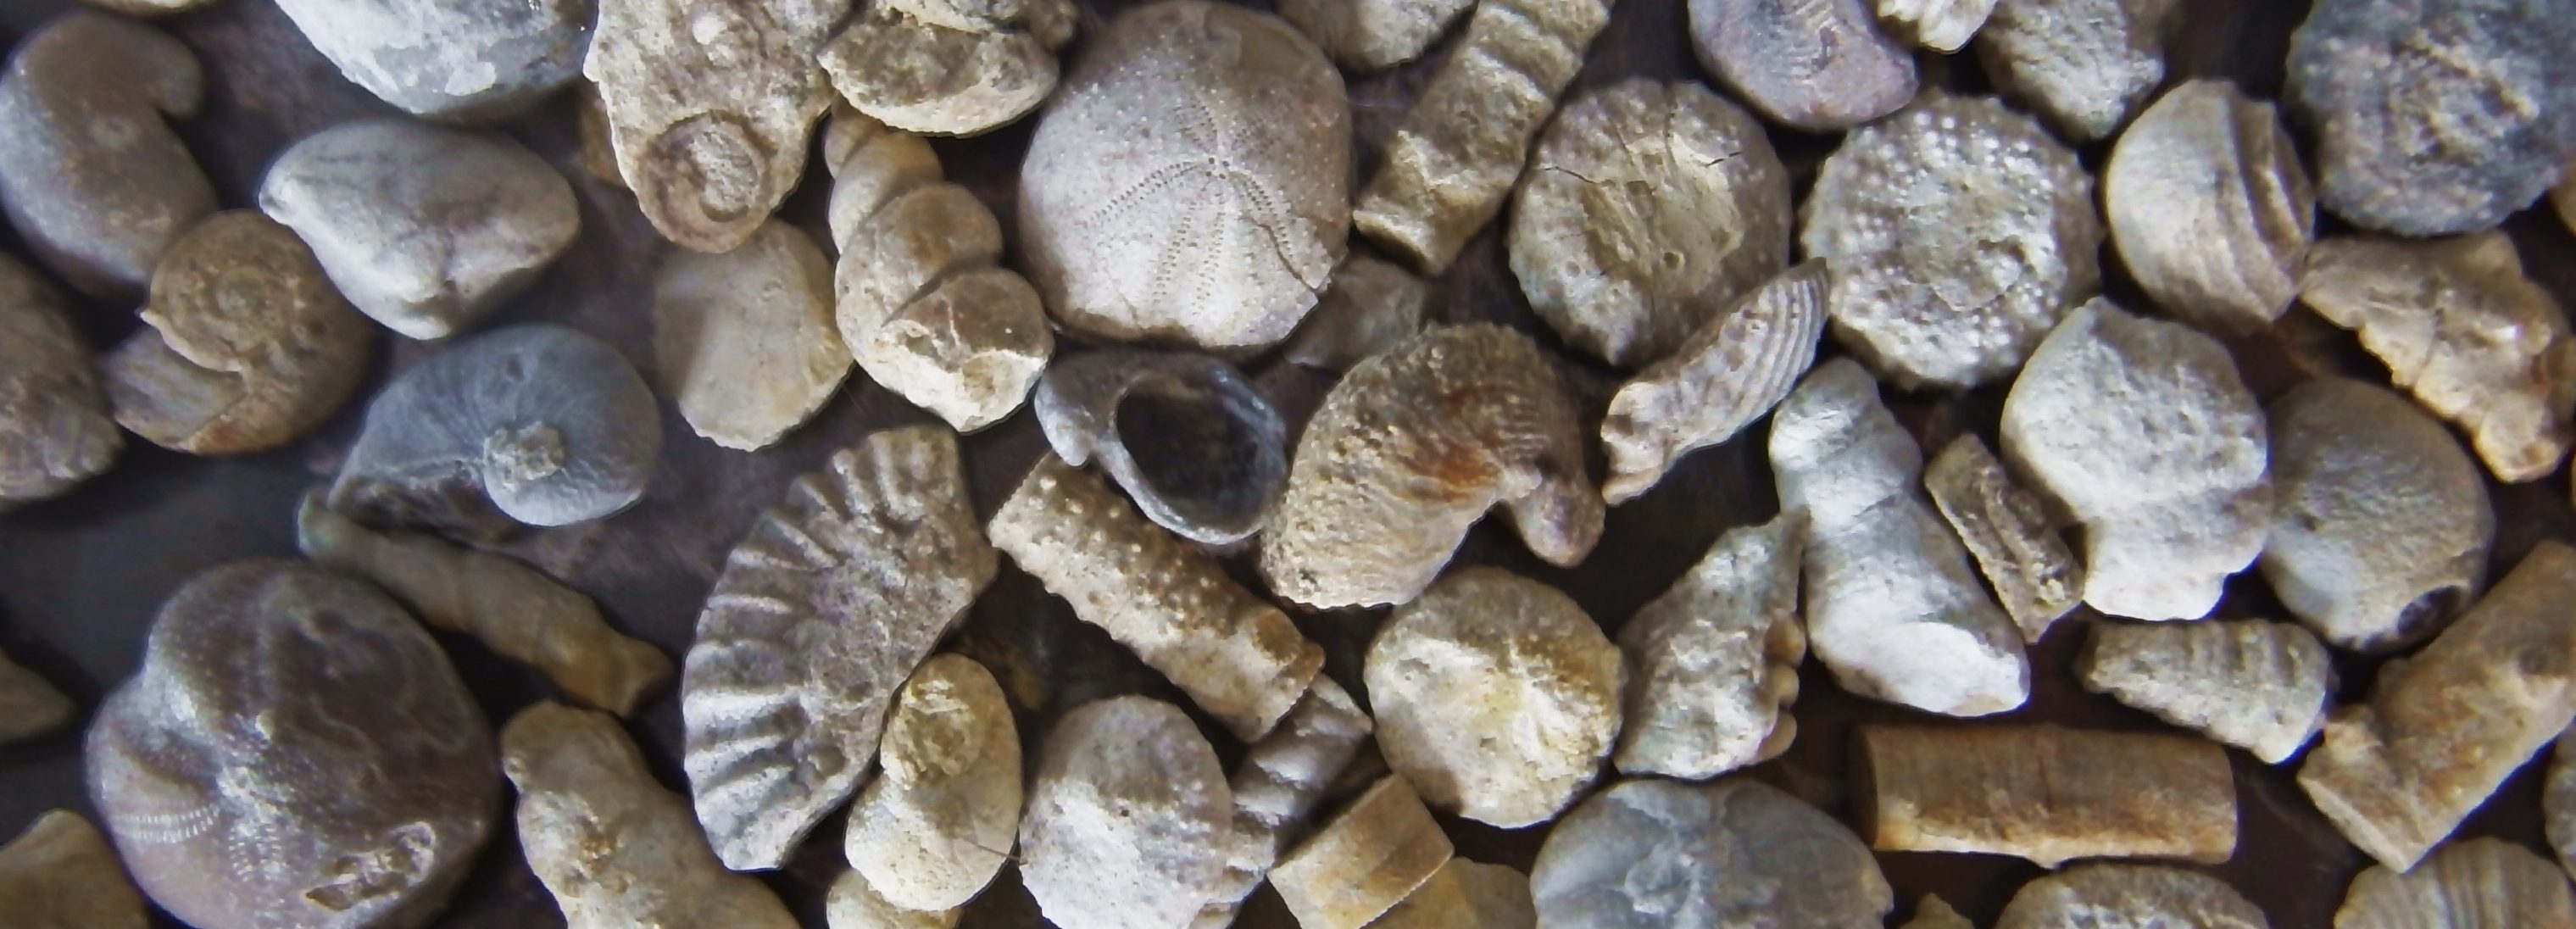 Fossil shell collections small sea shells 25 pieces sp 2 : Southern Arrow,  Fossil Shells From Southern Arrow For Sale